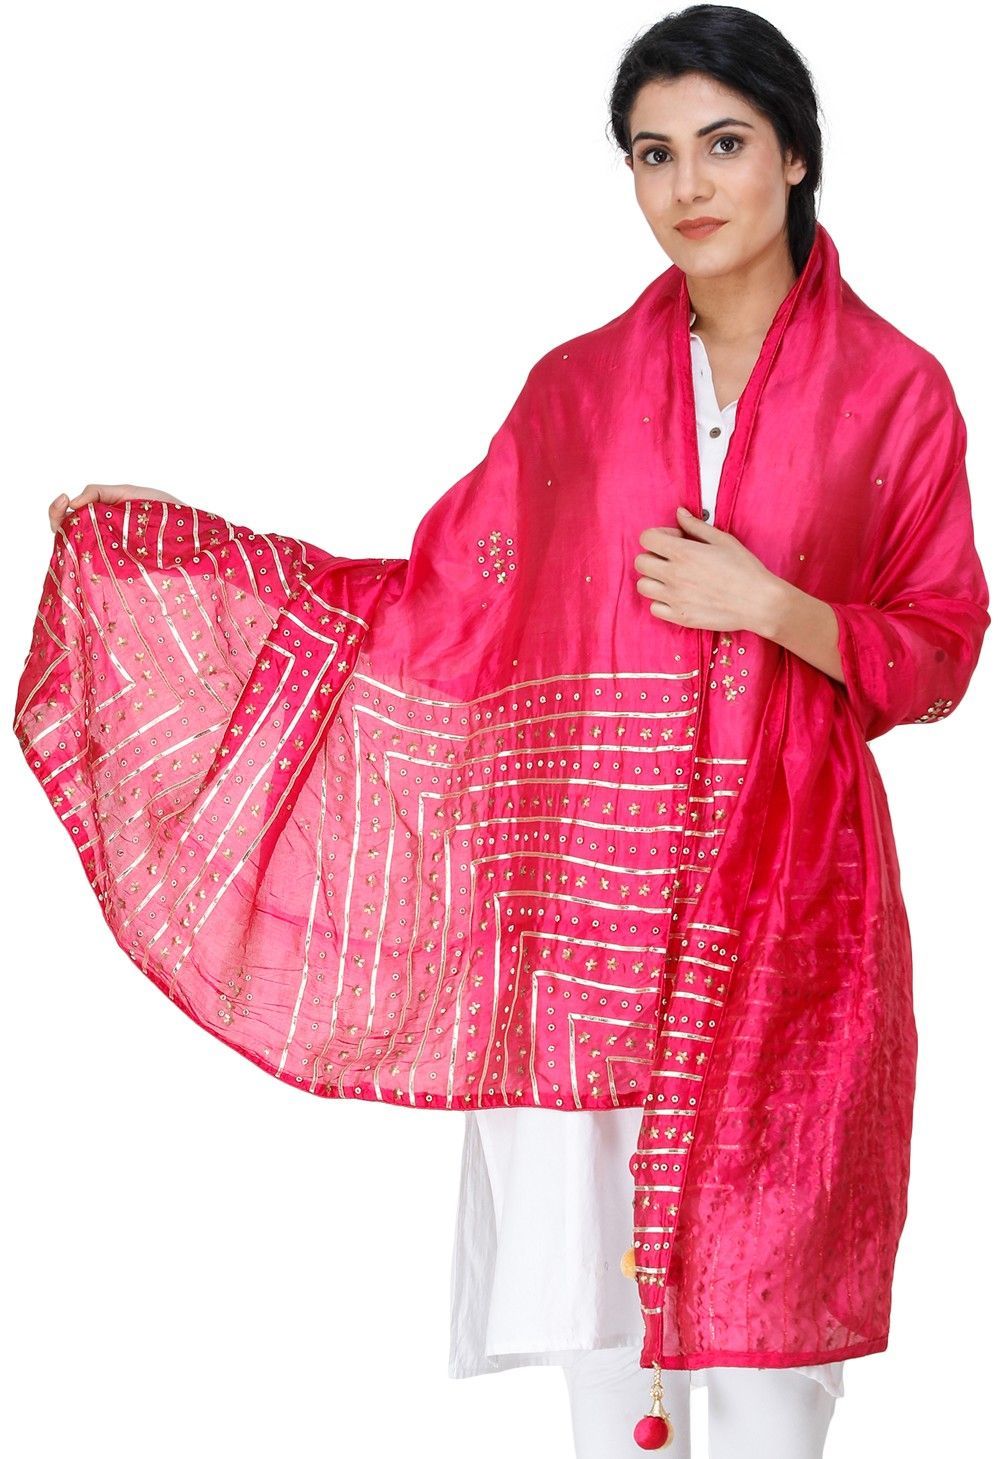 Love-Potion Silk Dupatta From Amritsar with Gota Patti, Floral Beads and Velvet Tassels on Edges